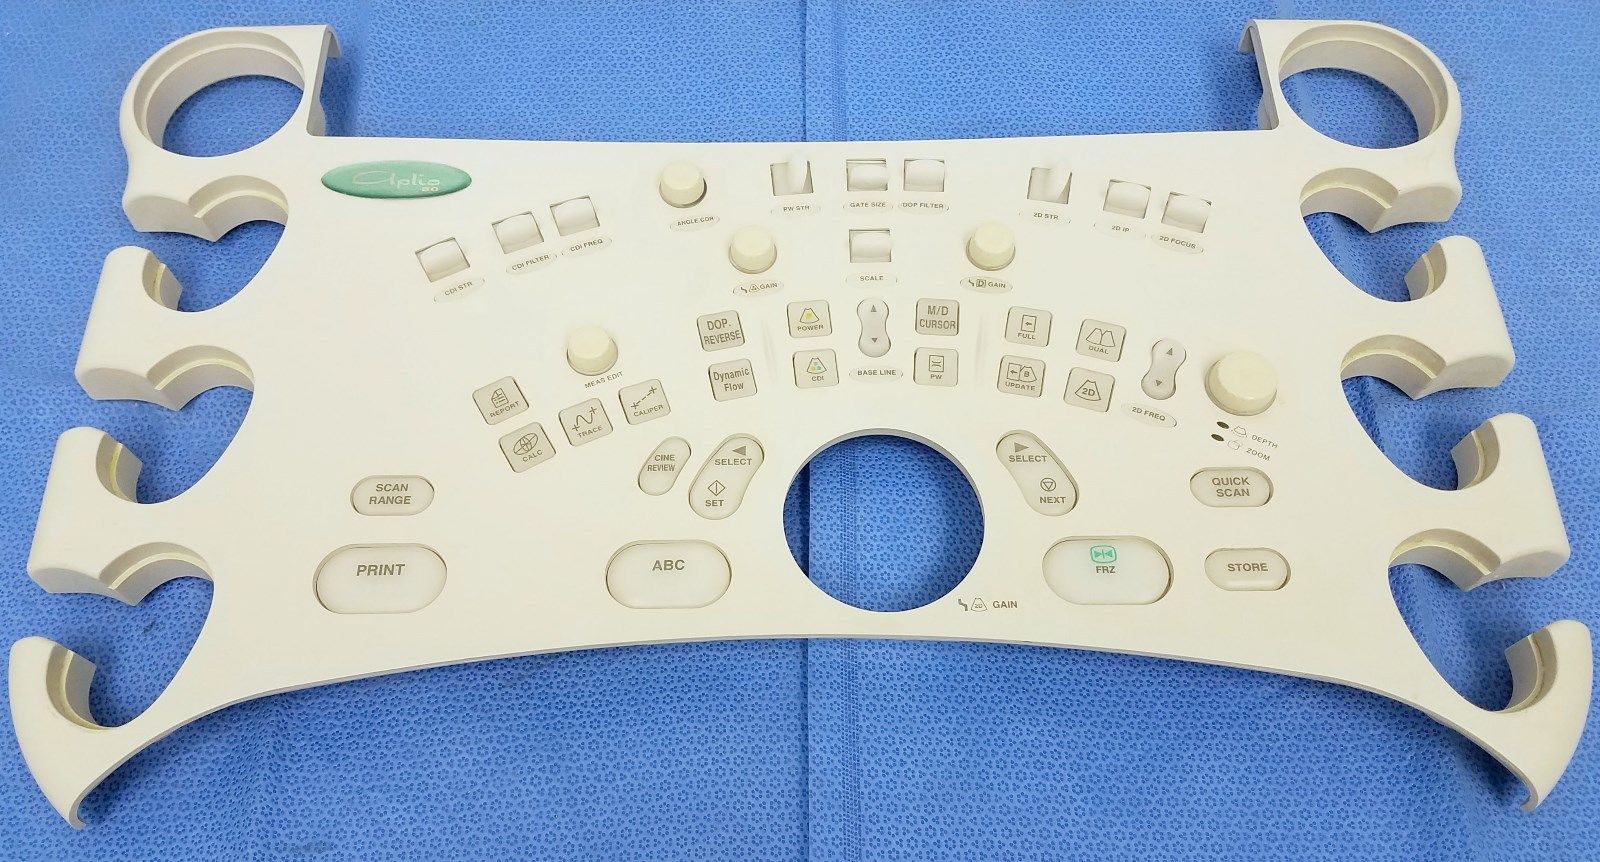 Toshiba Aplio Ultrasound UI User Interface Top Panel Cover w/ Extra Buttons DIAGNOSTIC ULTRASOUND MACHINES FOR SALE